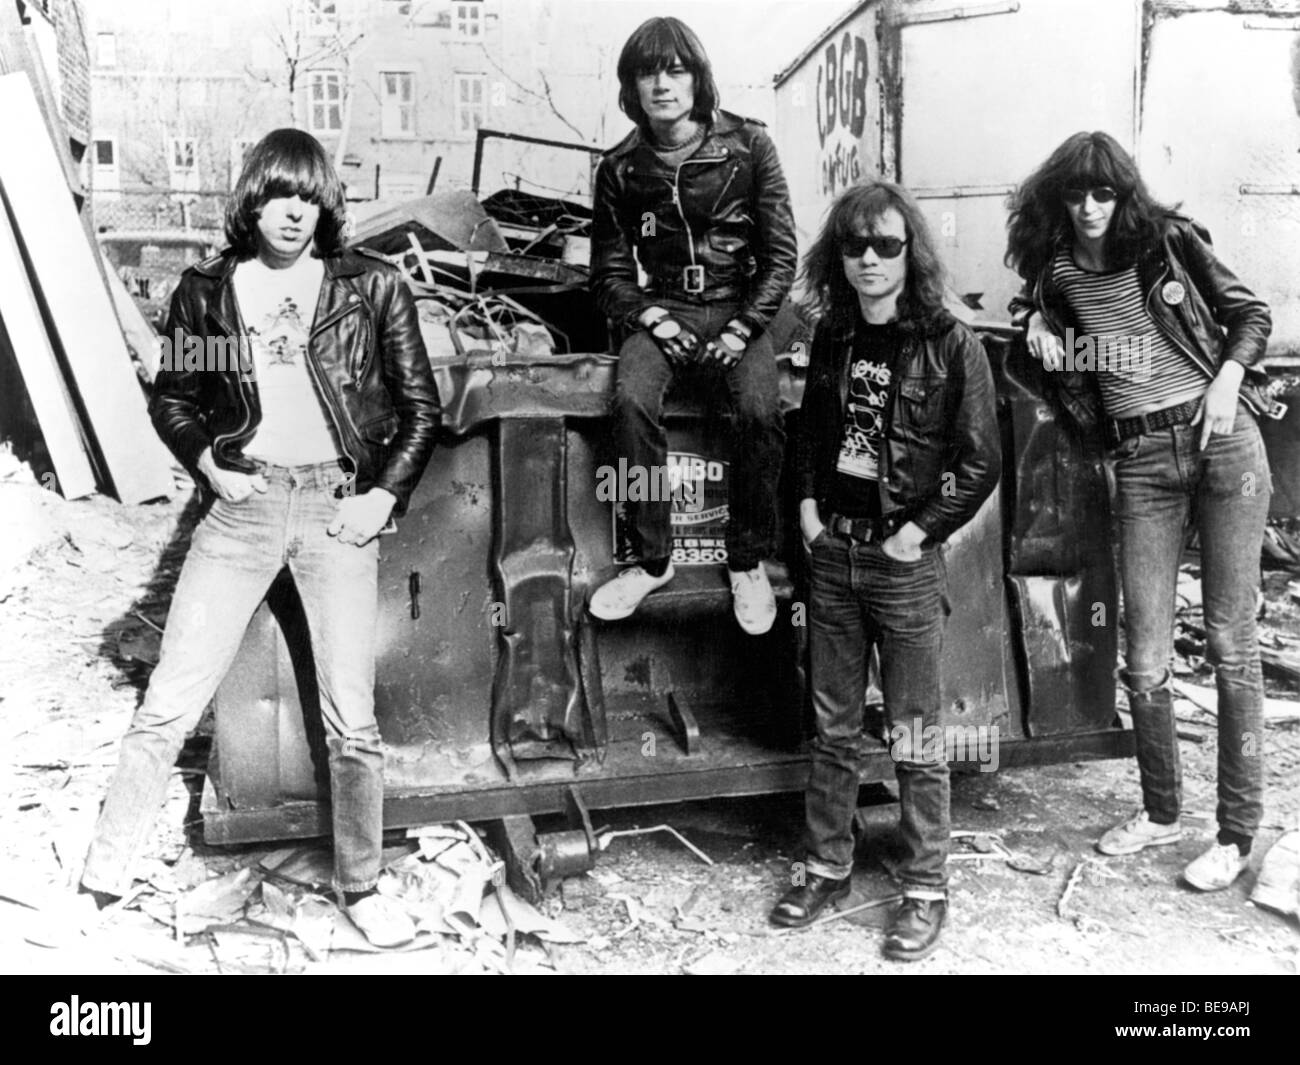 RAMONES - US rock group about 1979 Stock Photo